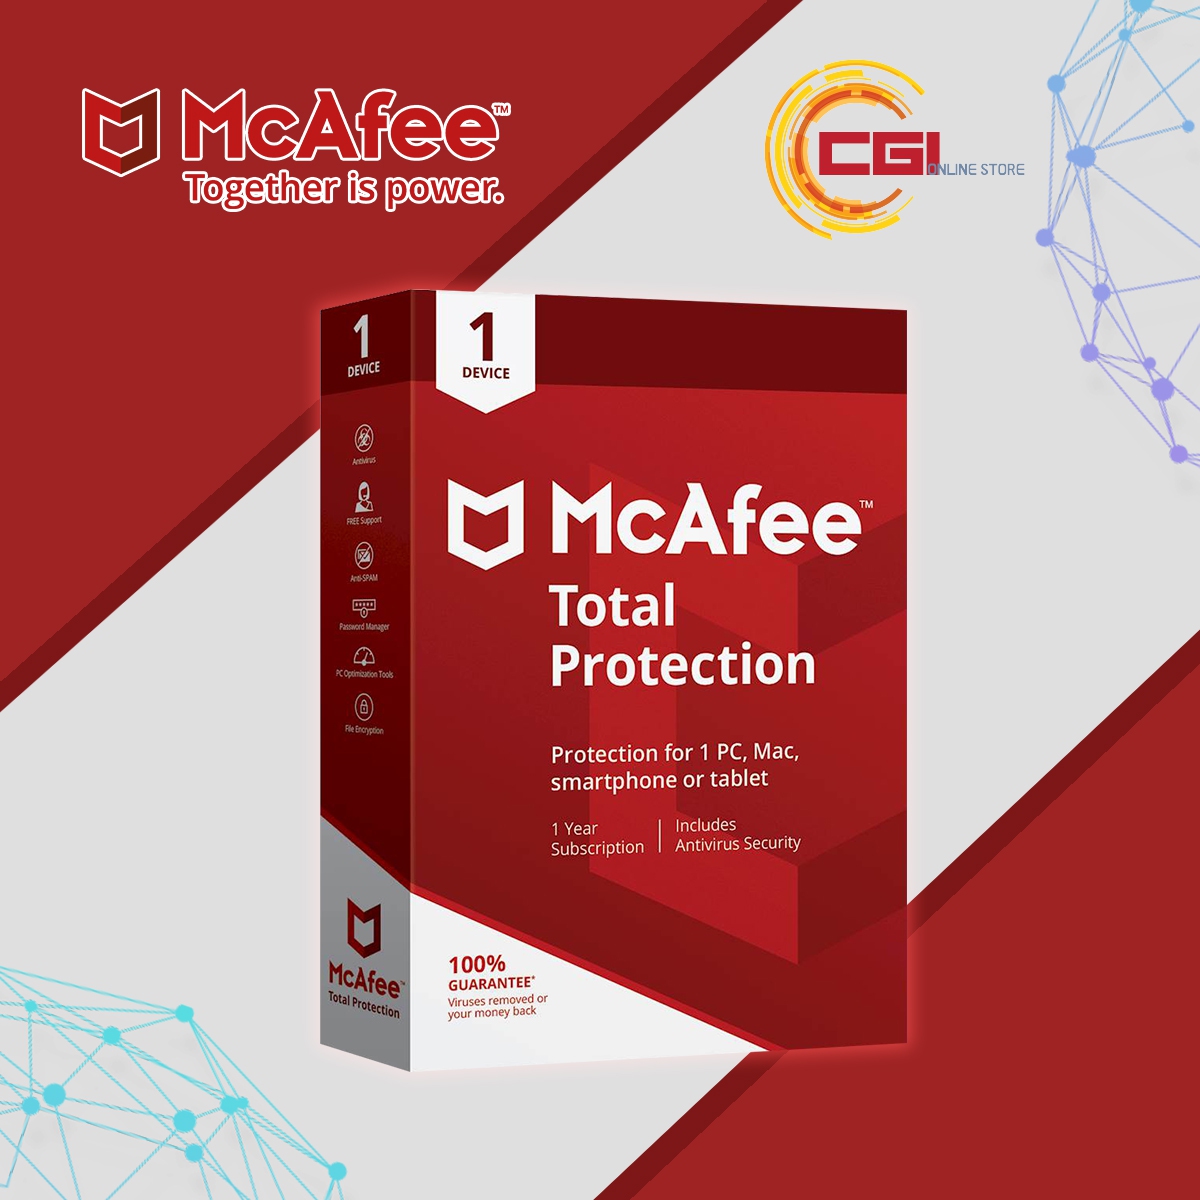 mcafee total protection price